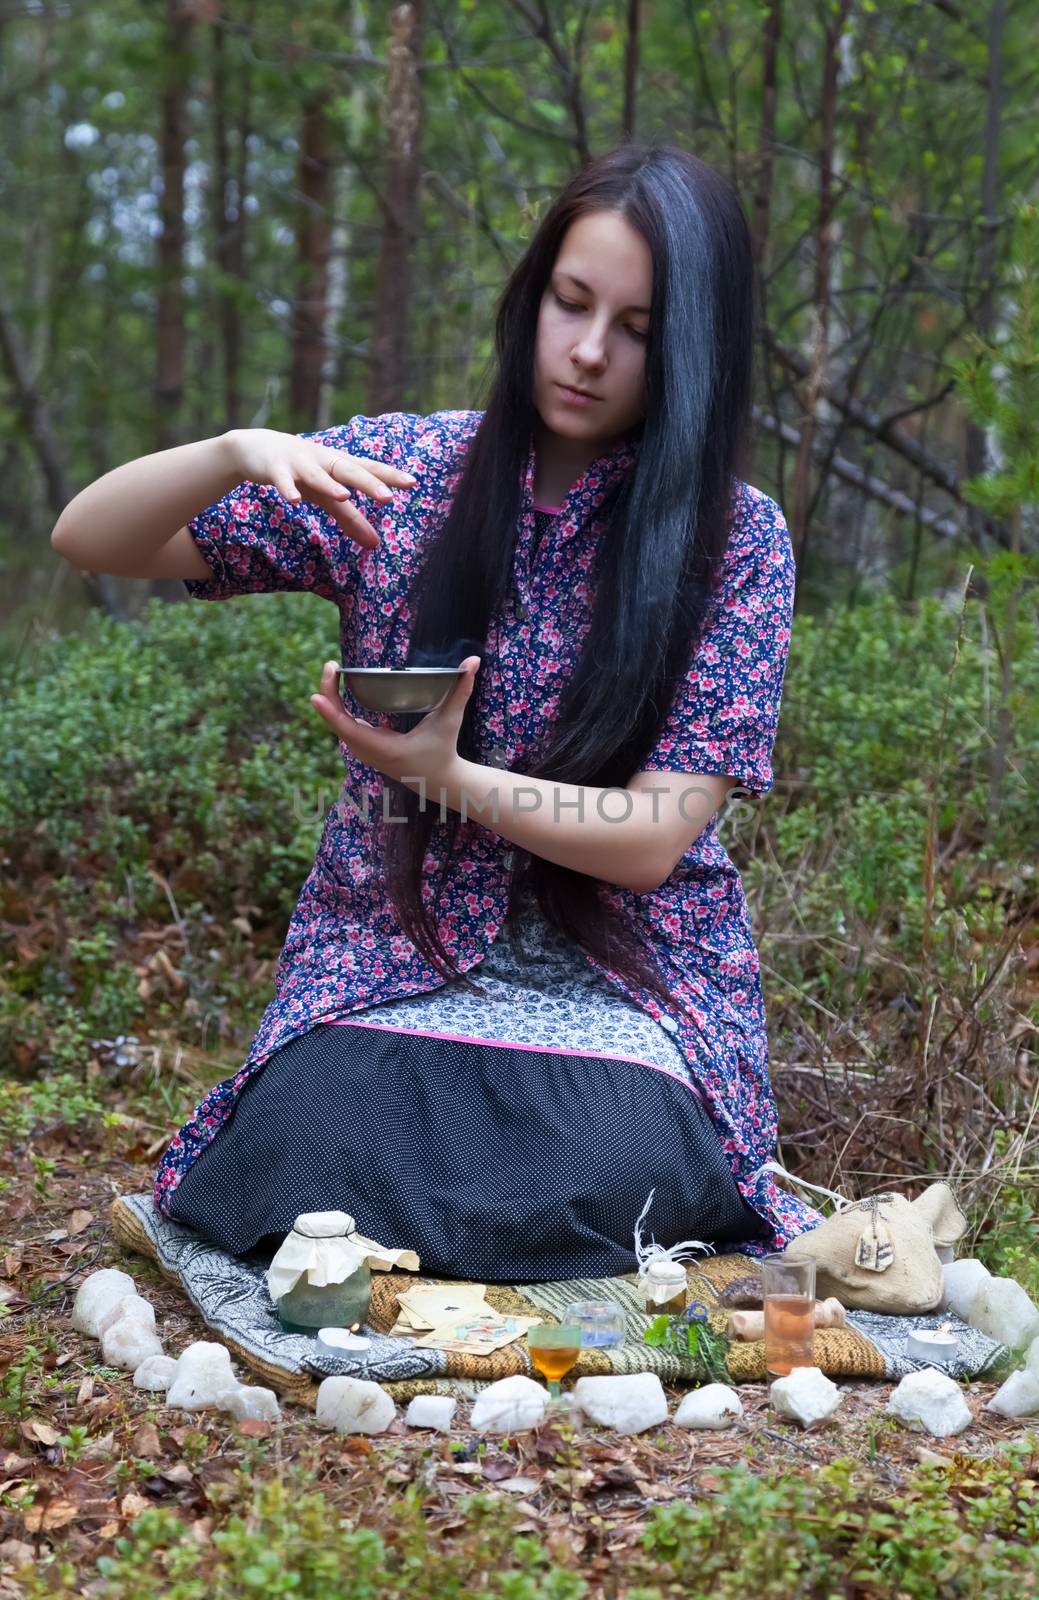 
Beautiful girl witch prepares witchcraft the drug in the woods 
